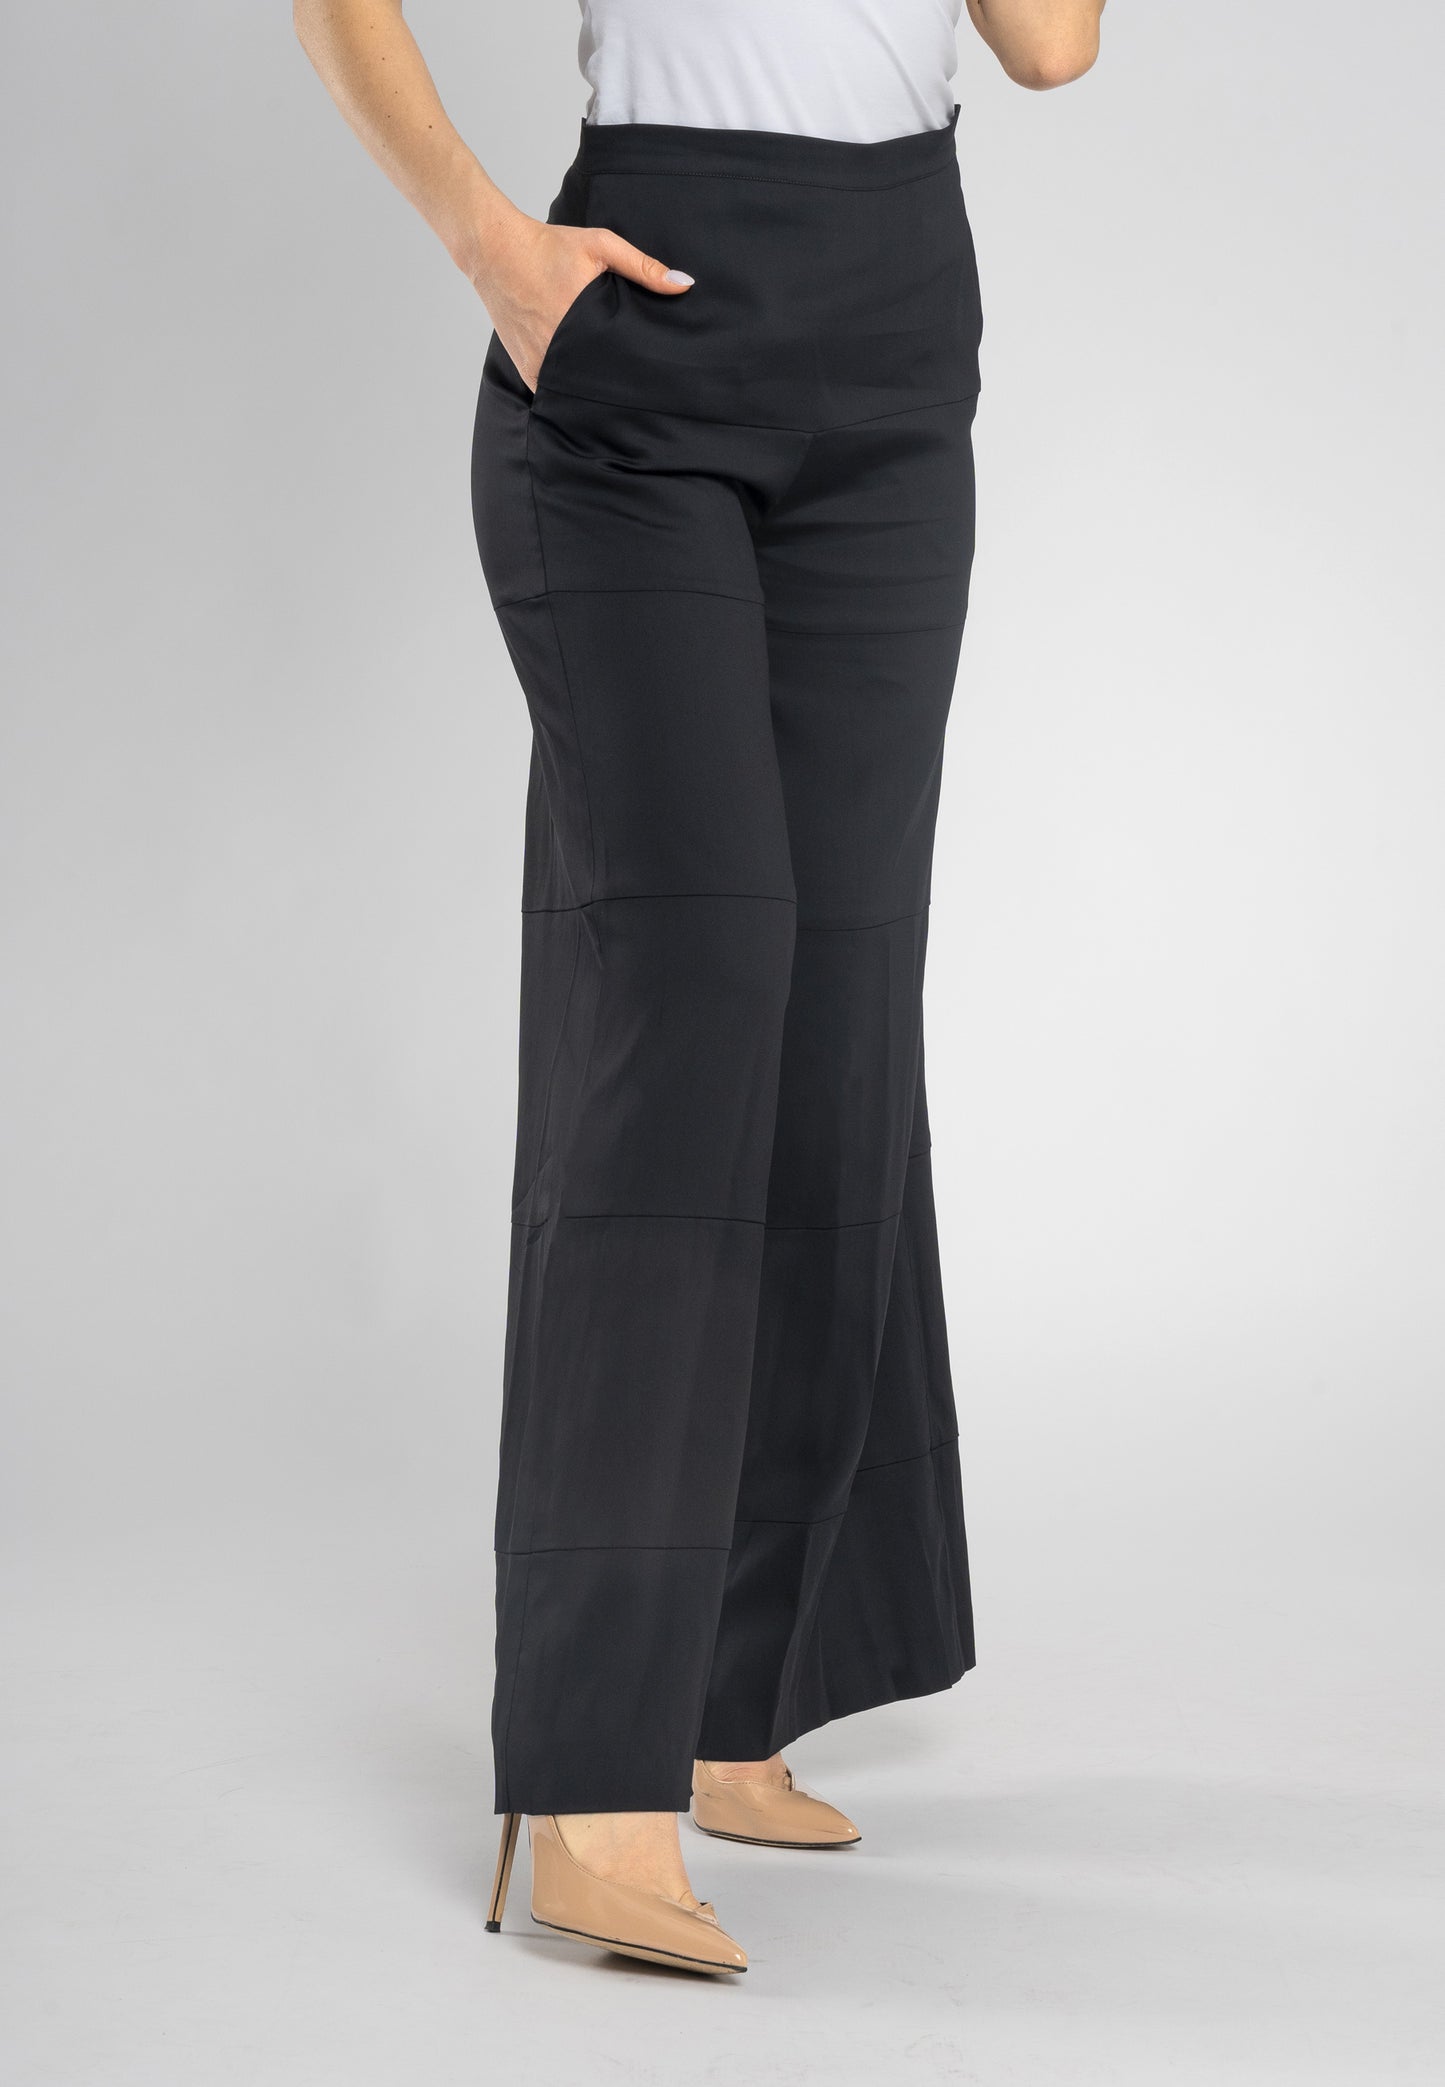 Calla Wide Leg Trousers - Elegant Bias Cut, Side Pockets, Detailed Stitching, Zip and Button Closure